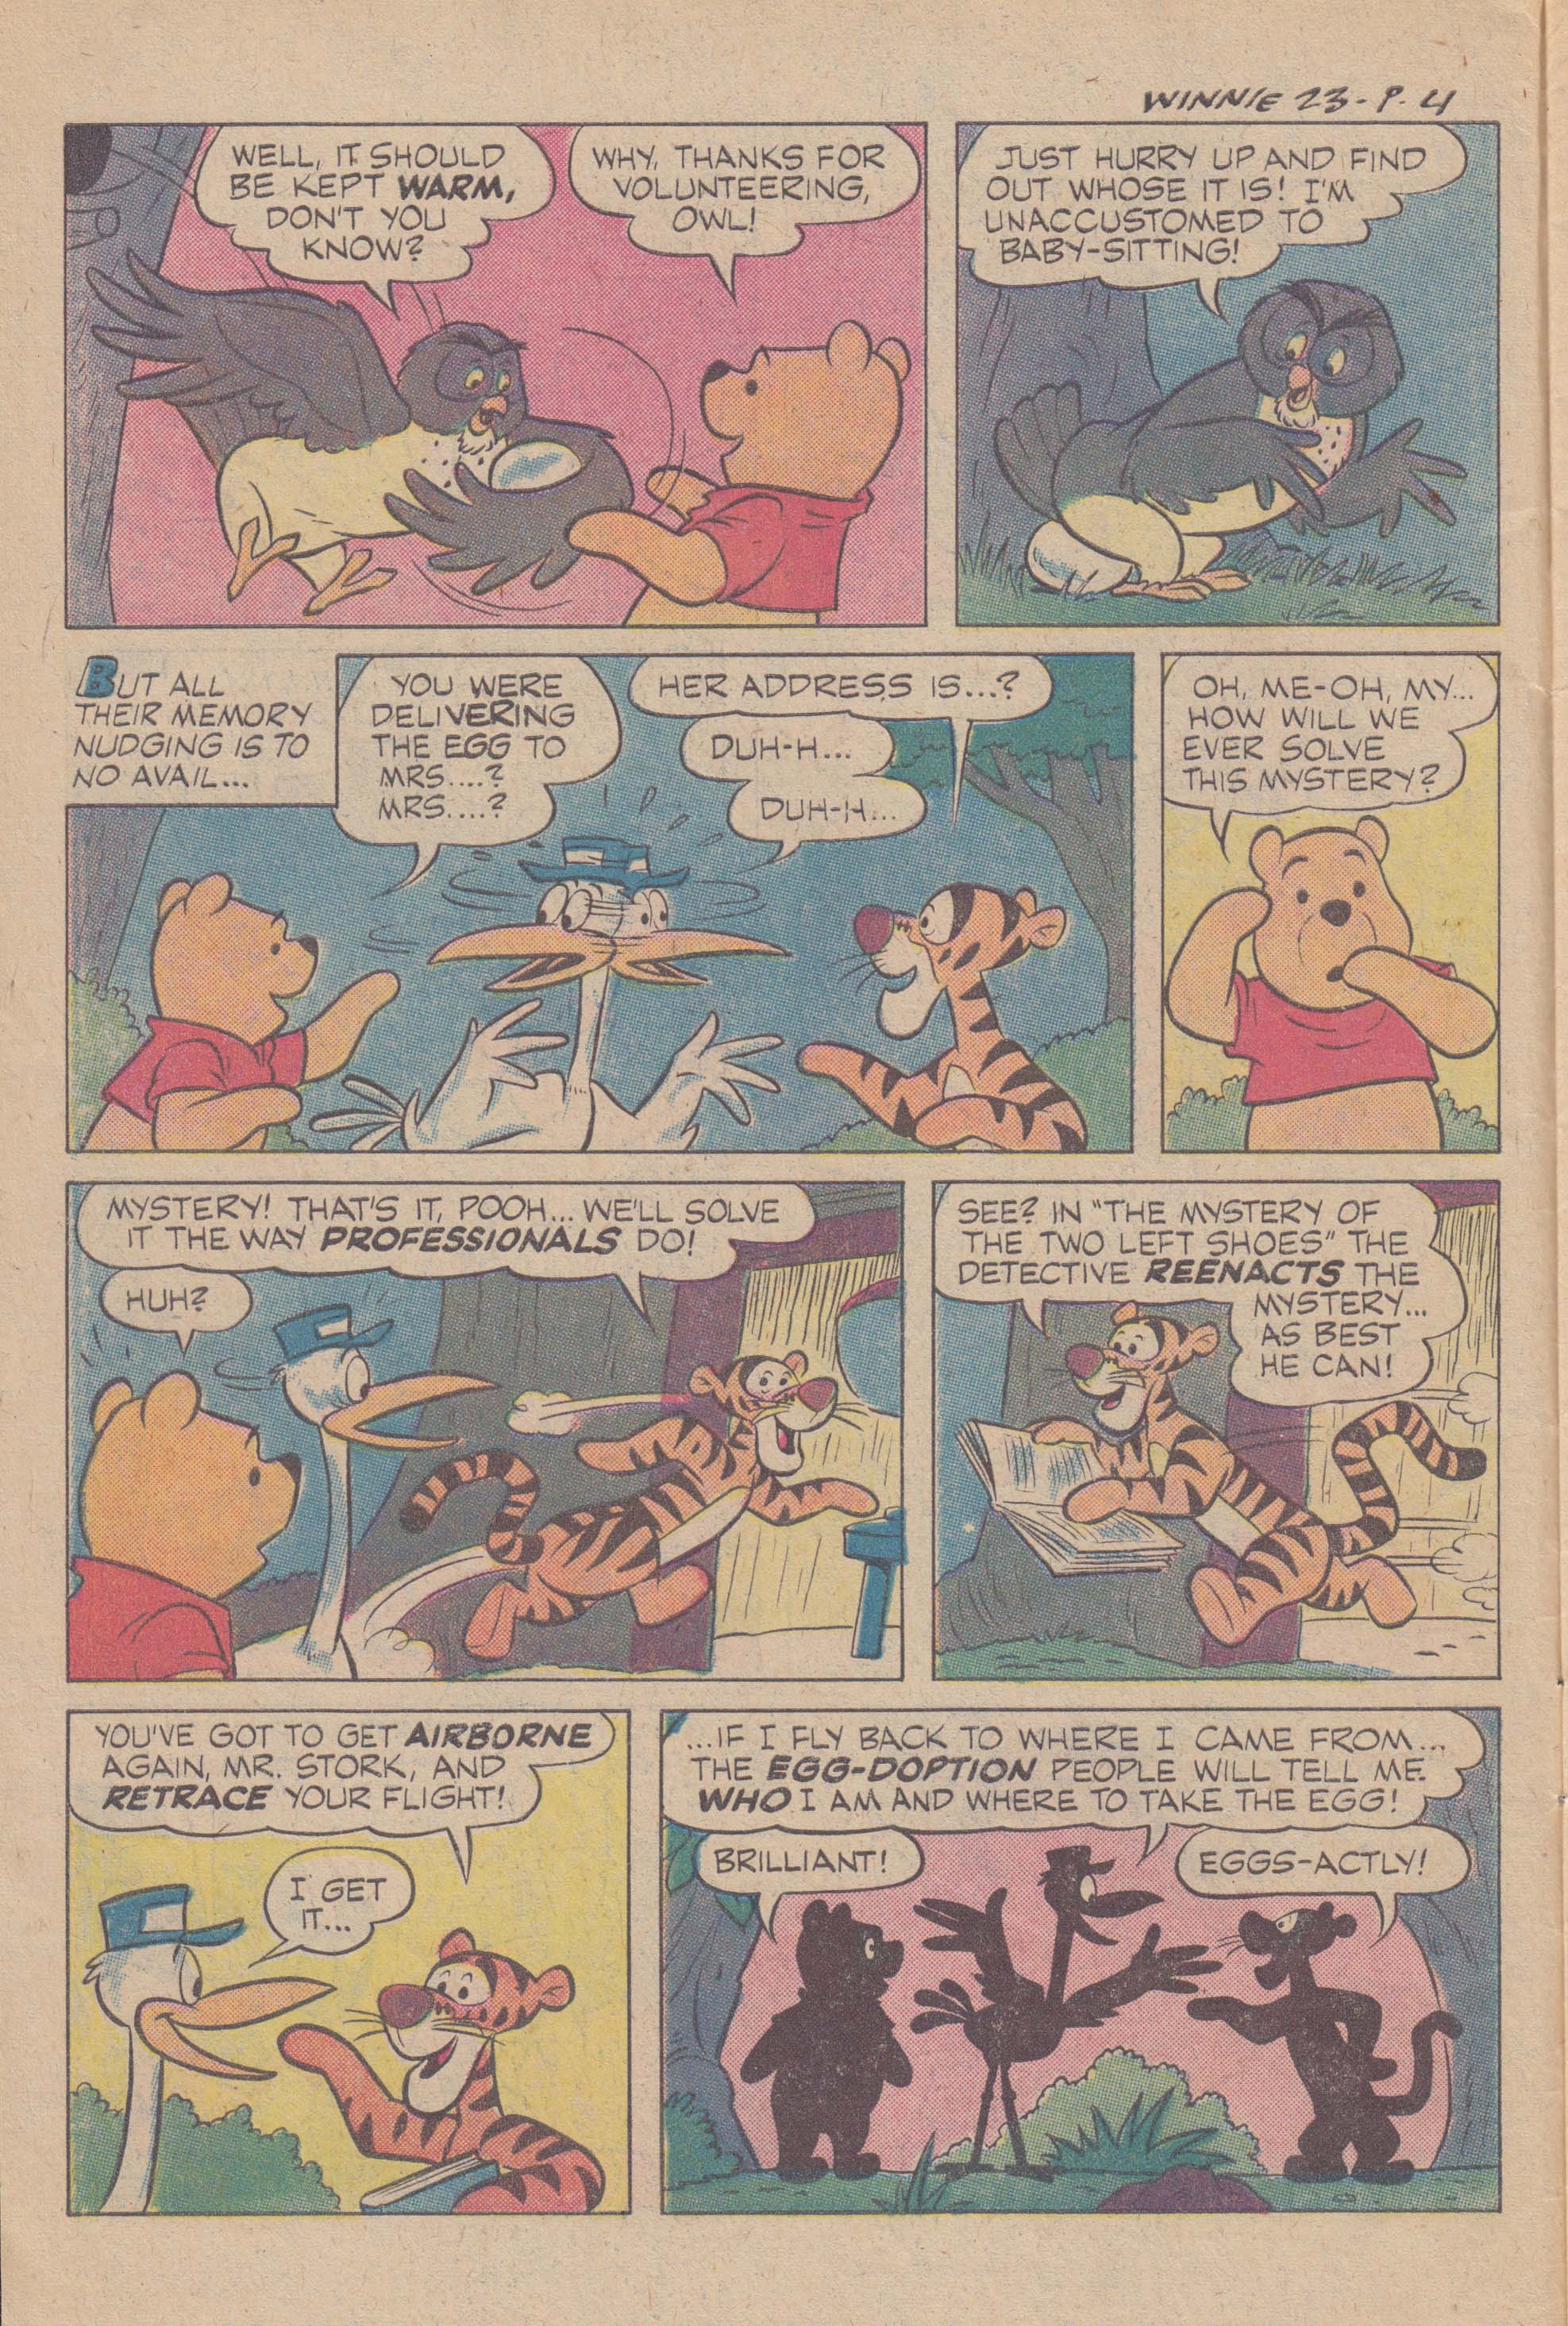 Read online Winnie-the-Pooh comic -  Issue #23 - 6